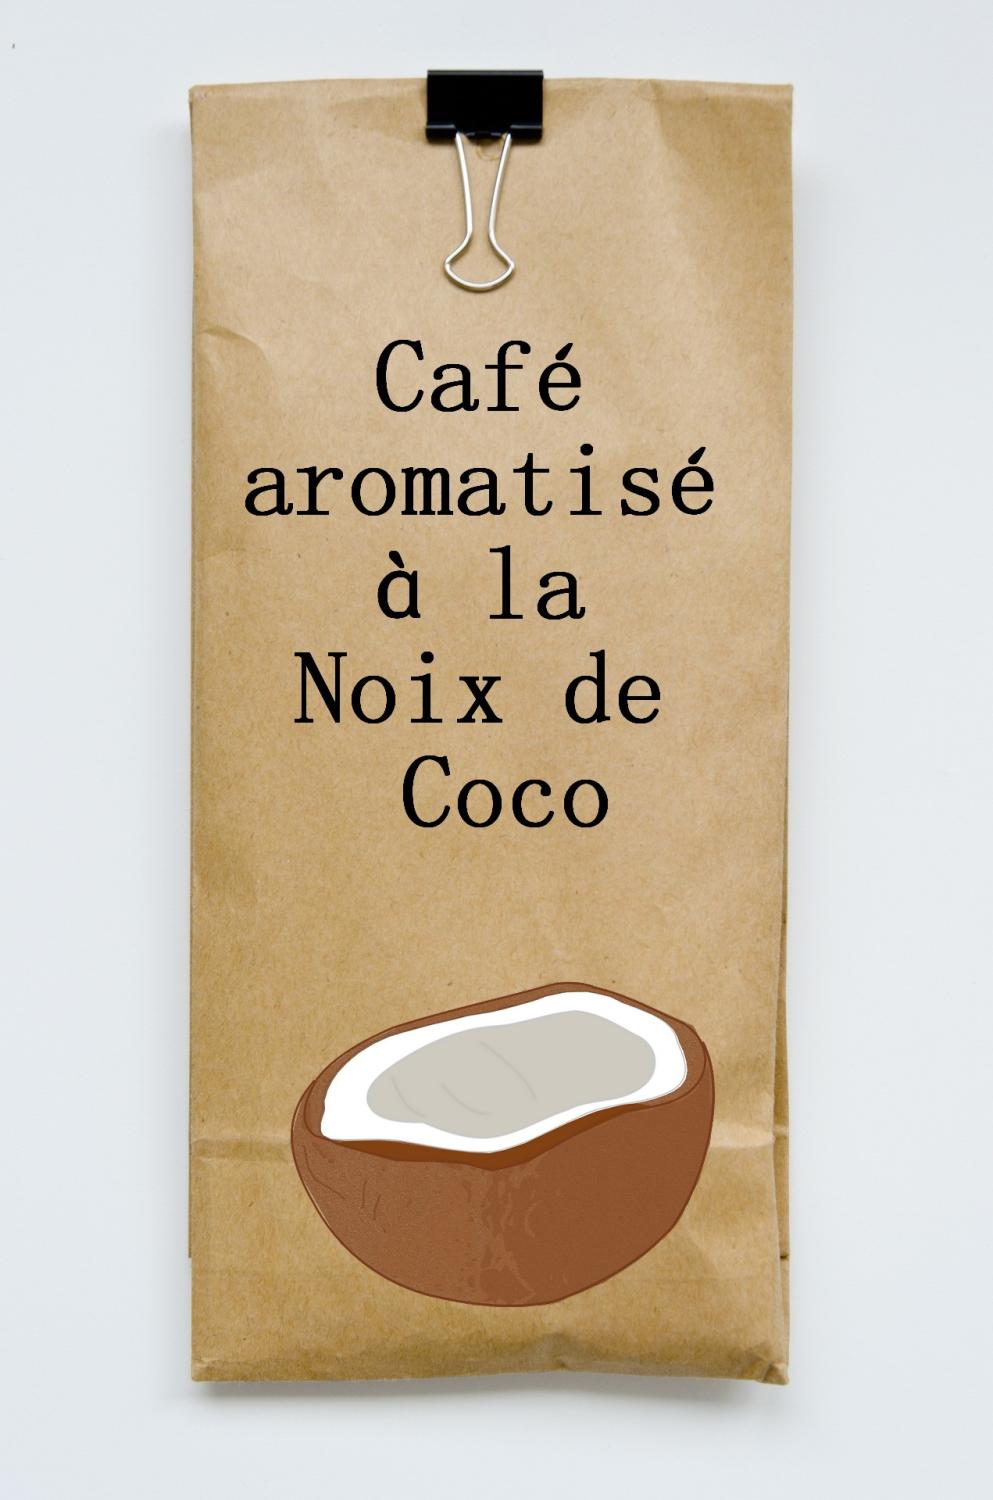 https://www.cafesdessertine.fr/images/Image/Cafe-aromatise-Noix-de-coco-COCO.jpg